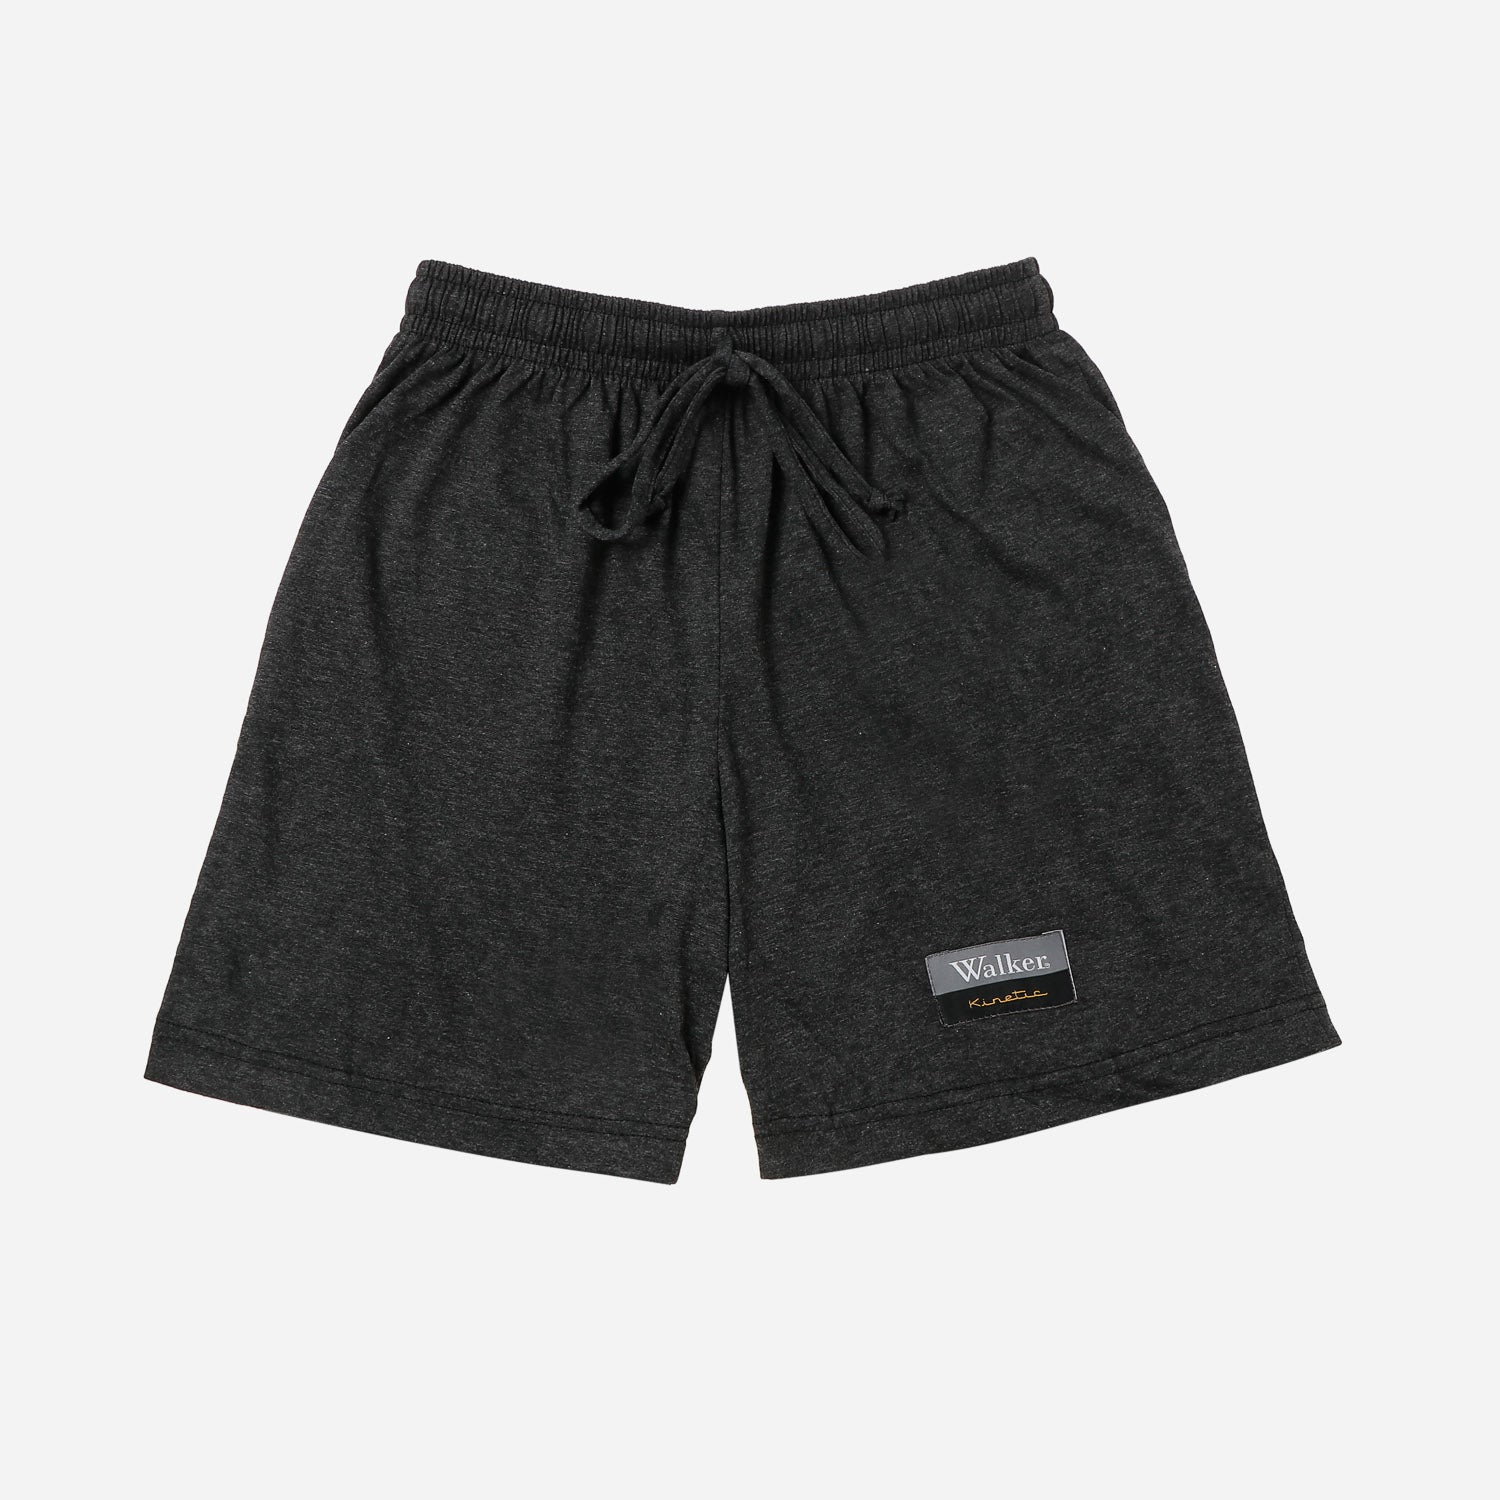 Order Boxer Shorts from Walker Online | The SM Store